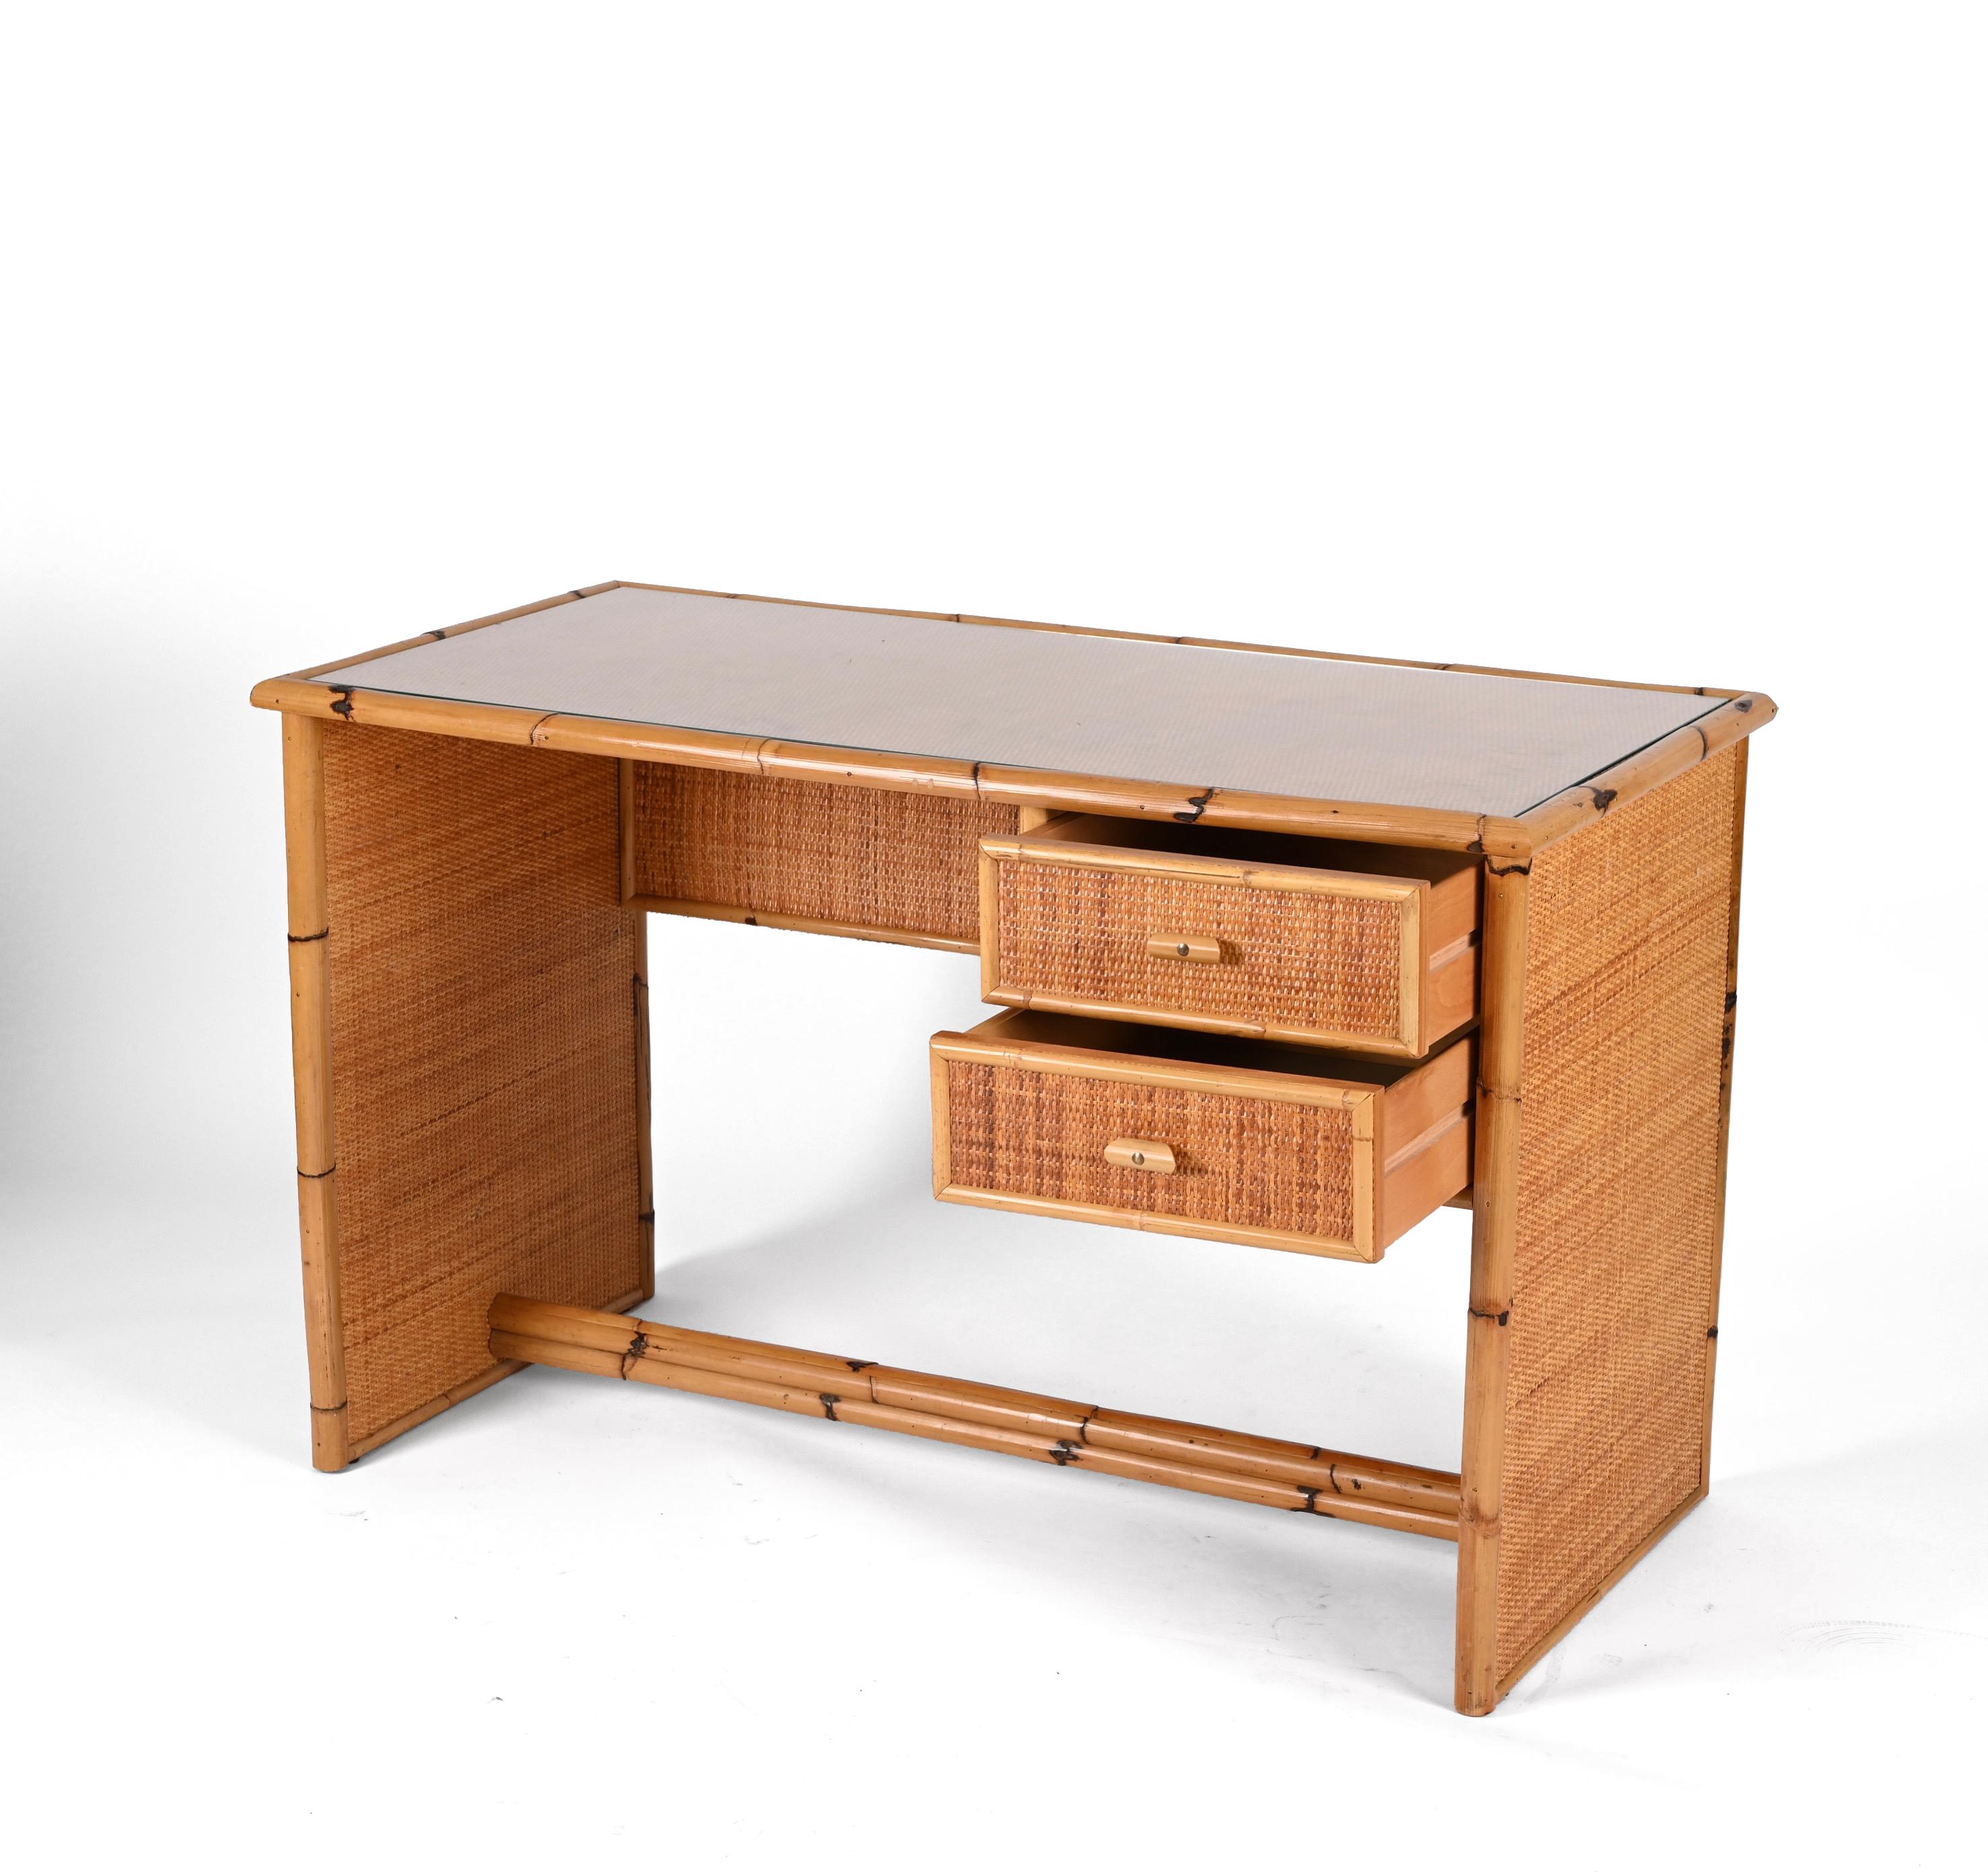 Midcentury Glass Top, Bamboo and Wicker Italian Desk with Drawers, 1980s For Sale 7